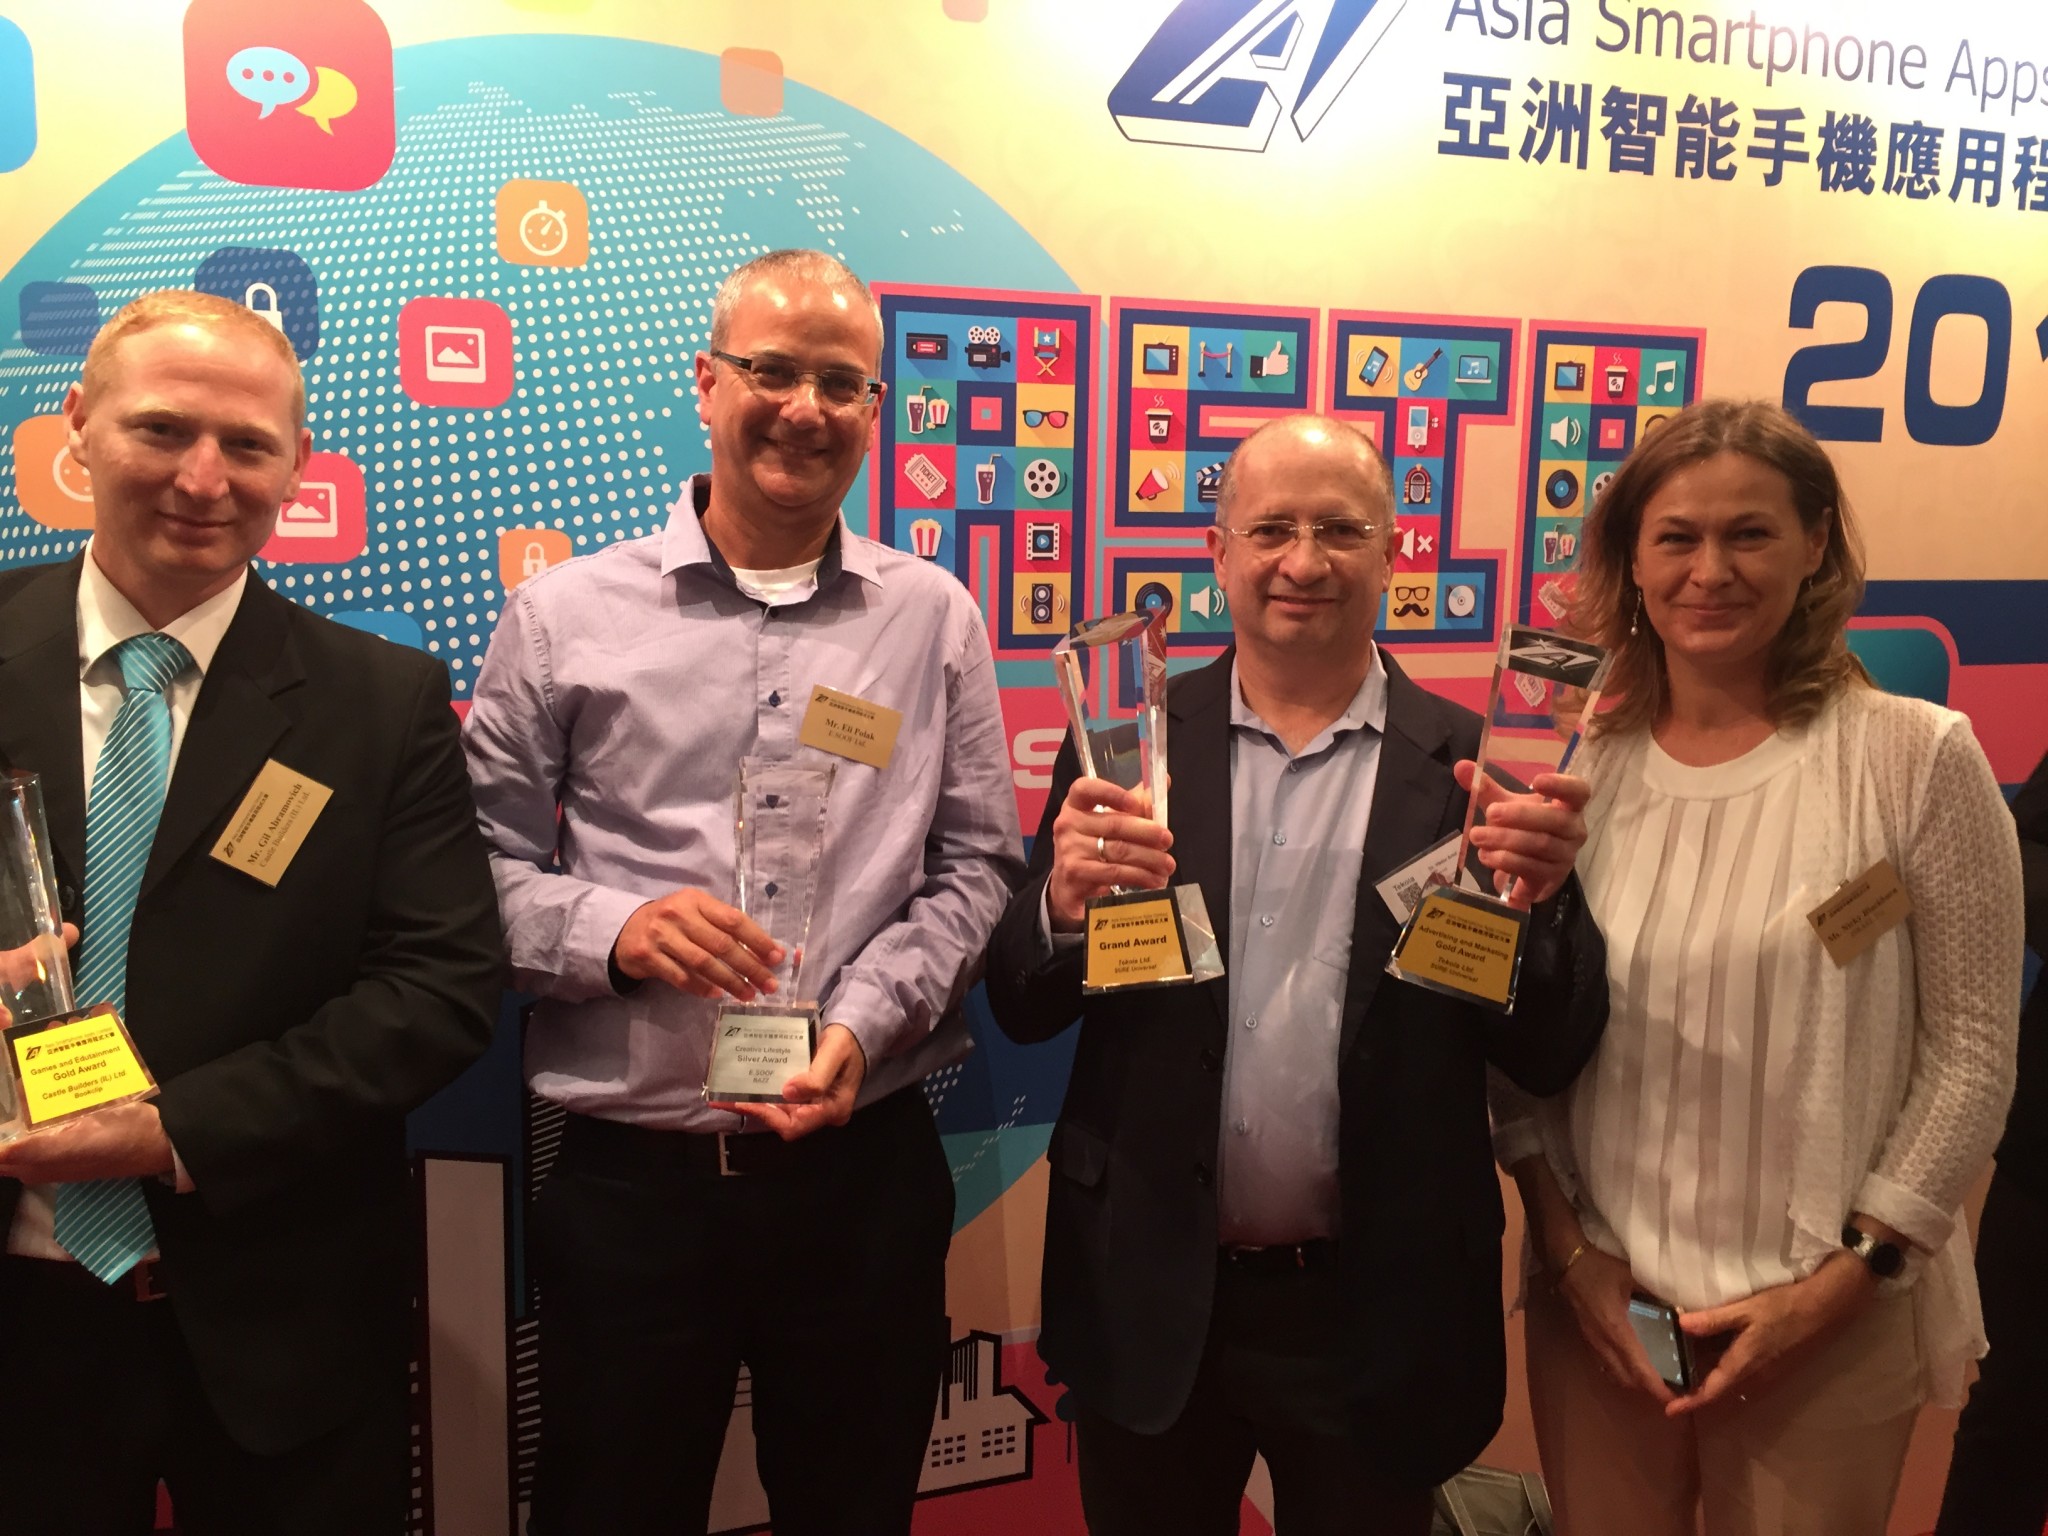 Gil Abramovich of Castle Builders, Eli Polak of Bazz, Dr. Viktor Ariel of Tekoia, and Nicky Blackburn, Editor of ISRAEL21c, at the Asia Smartphone App Contest in Hong Kong.